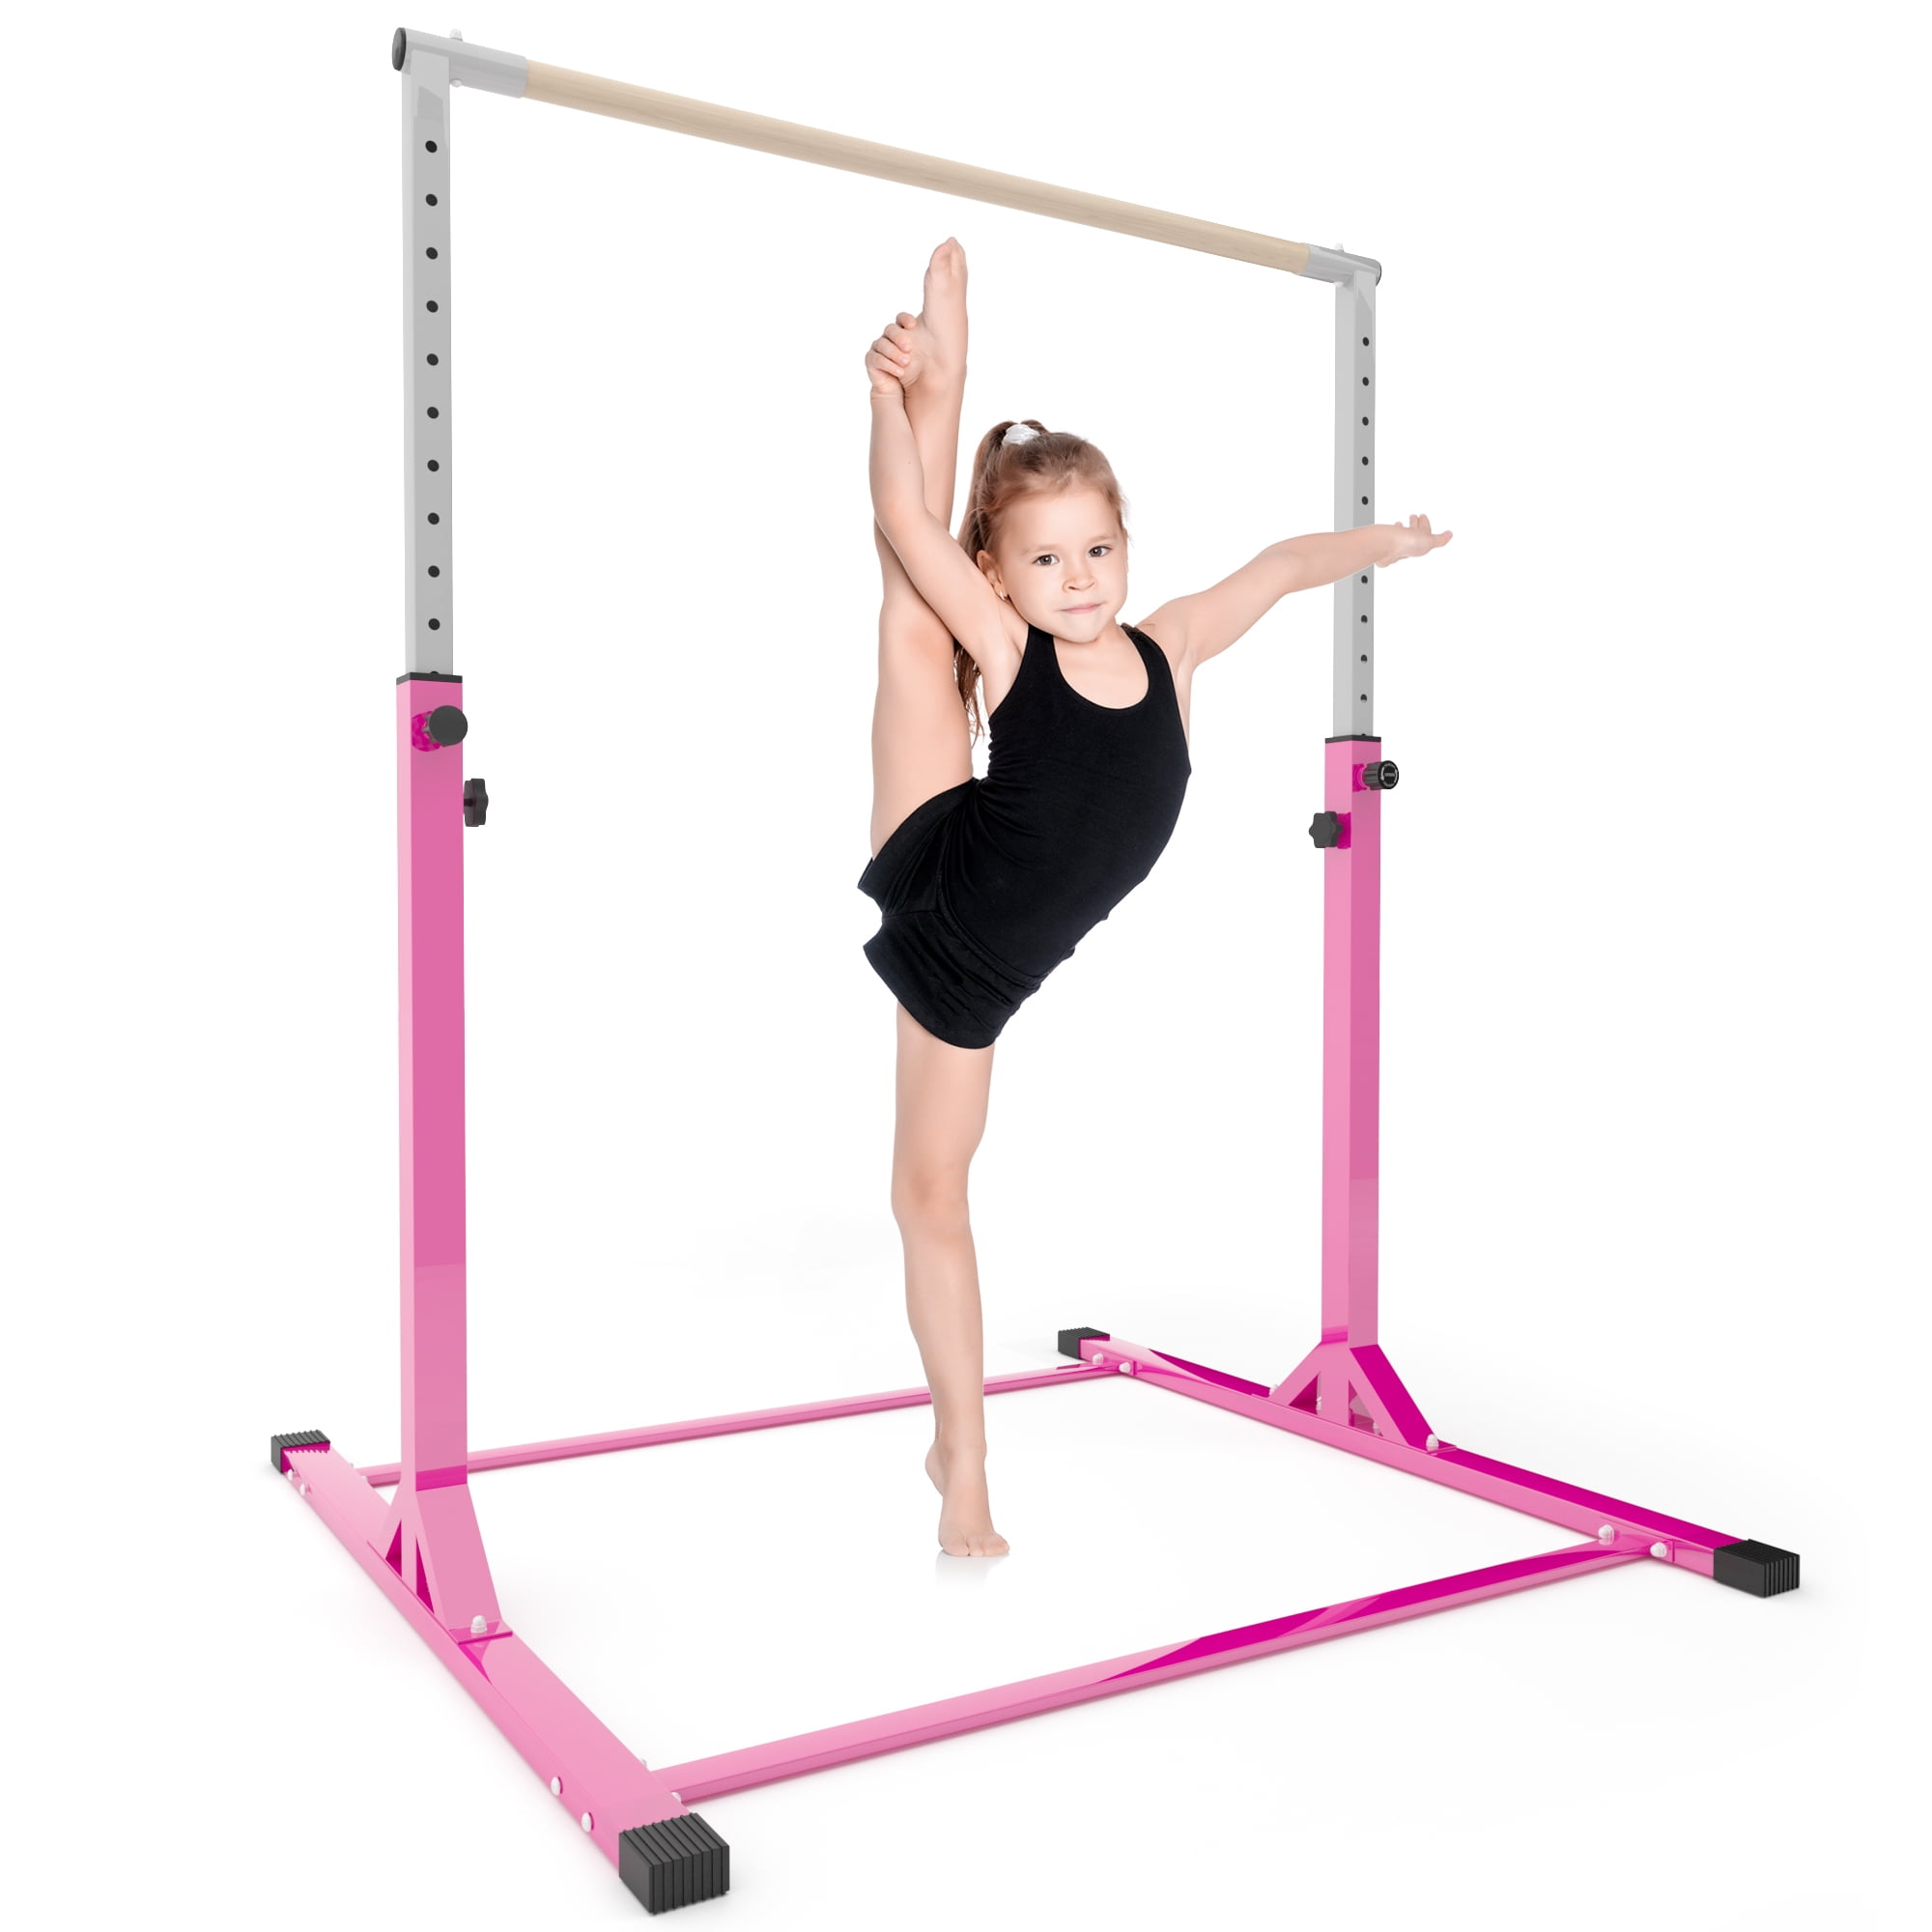 Safly Fun Gymnastics Bar for Kids Ages 3-15 for Home - Steady Steel  Construction, Anti-Slip, Easy to Assemble, 3' to 5' Adjustable Height